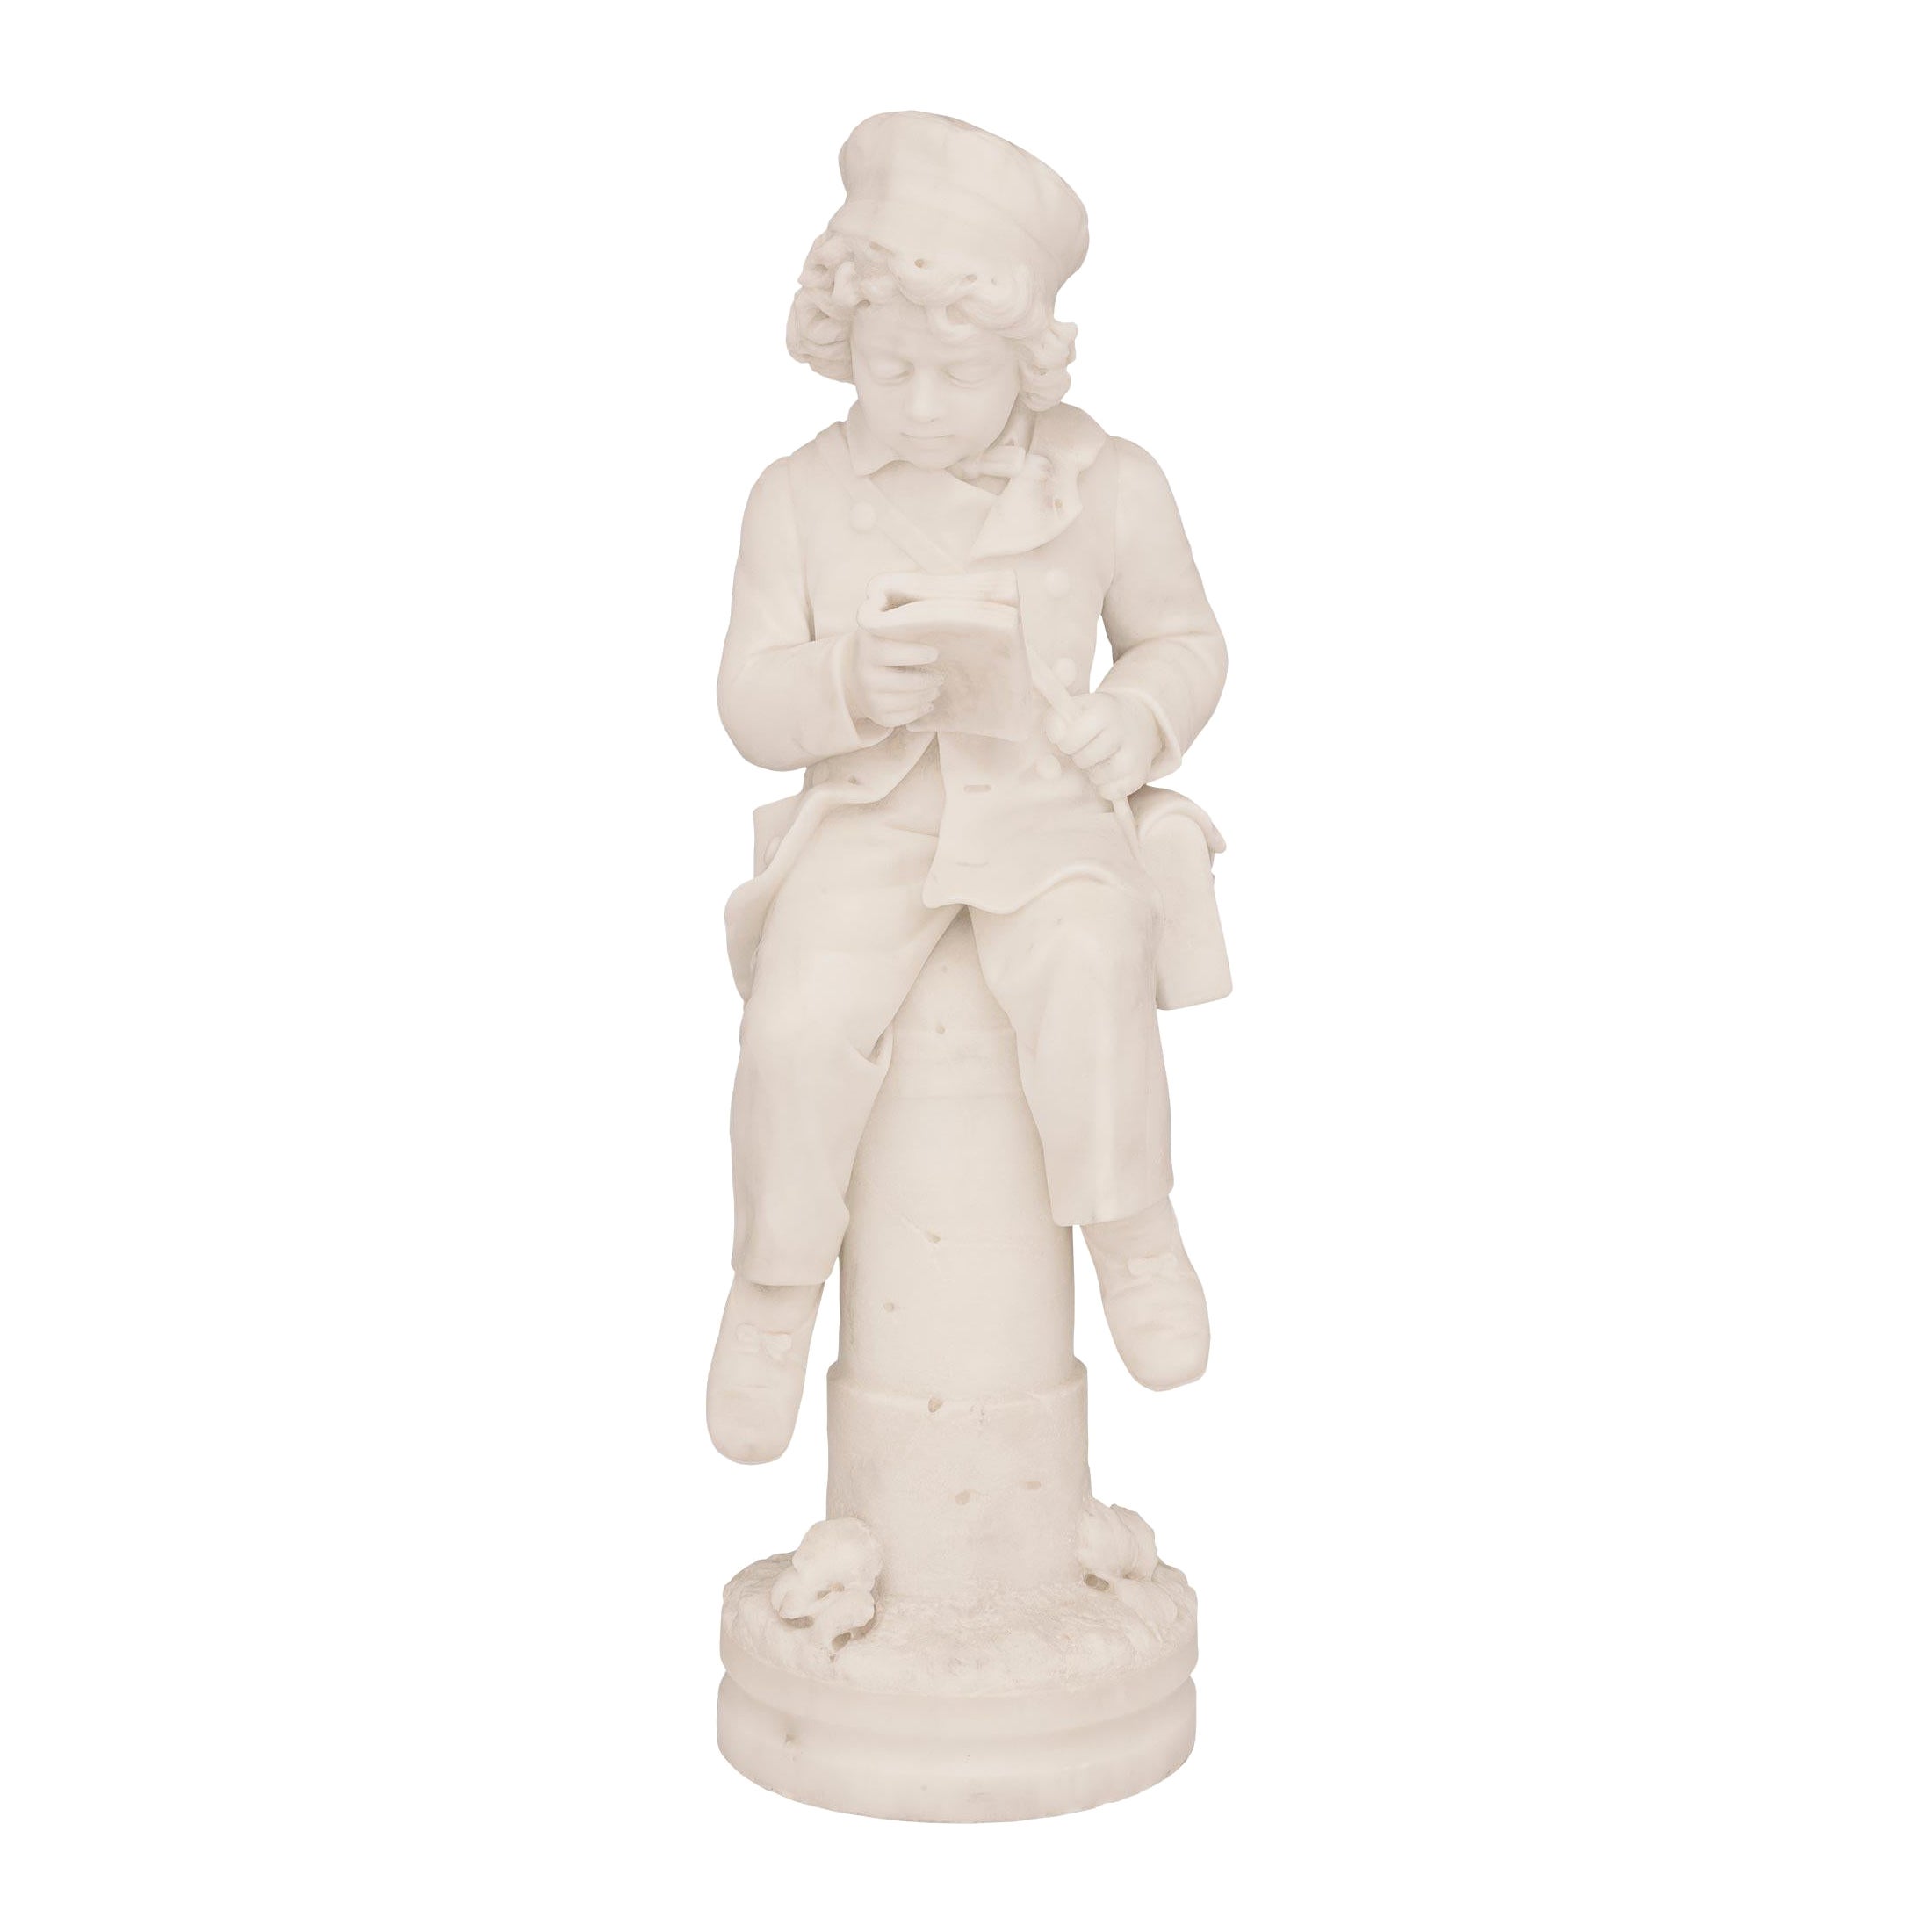 Italian 19th Century White Carrara Marble Statue of a Young Boy Reading a Book For Sale